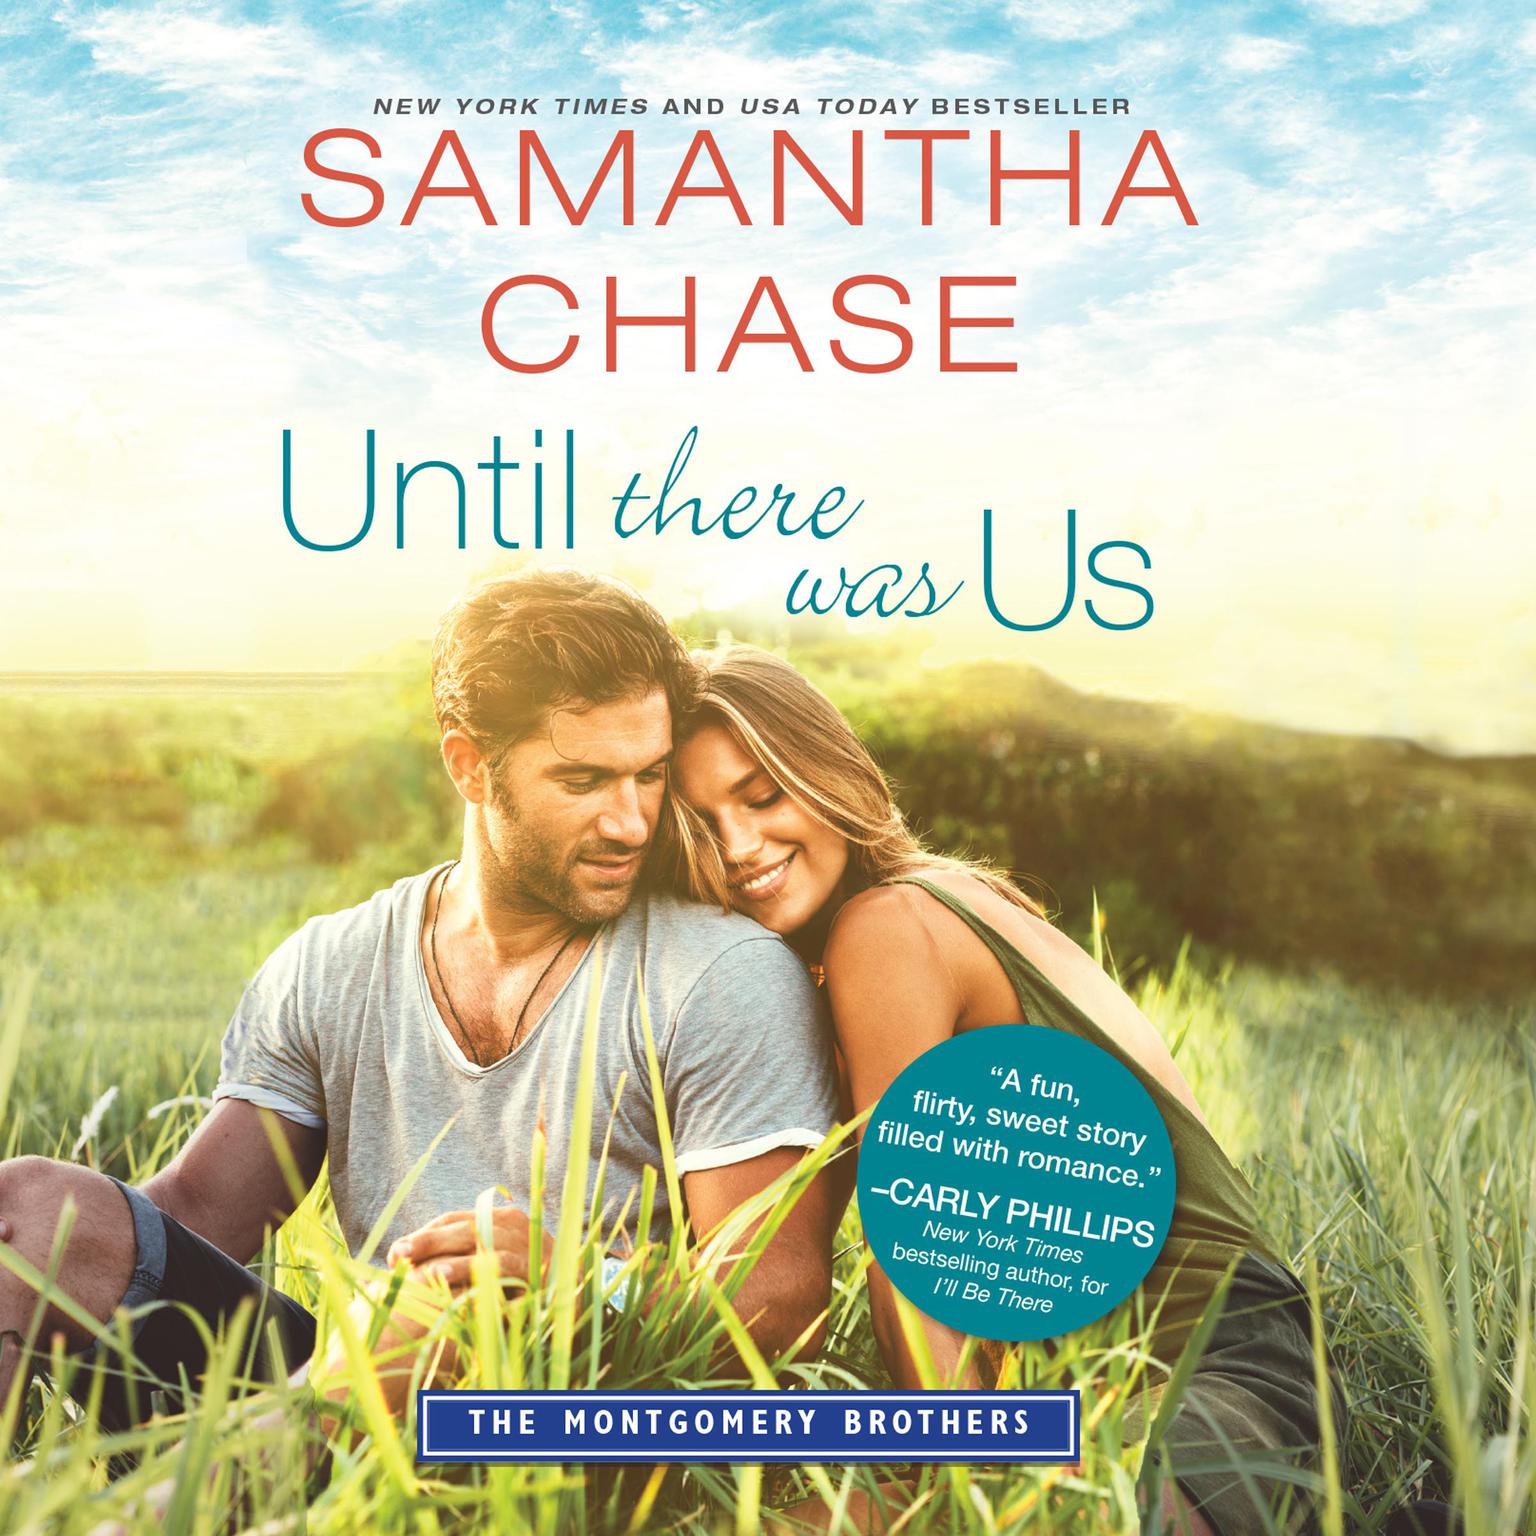 Until There Was Us Audiobook, by Samantha Chase